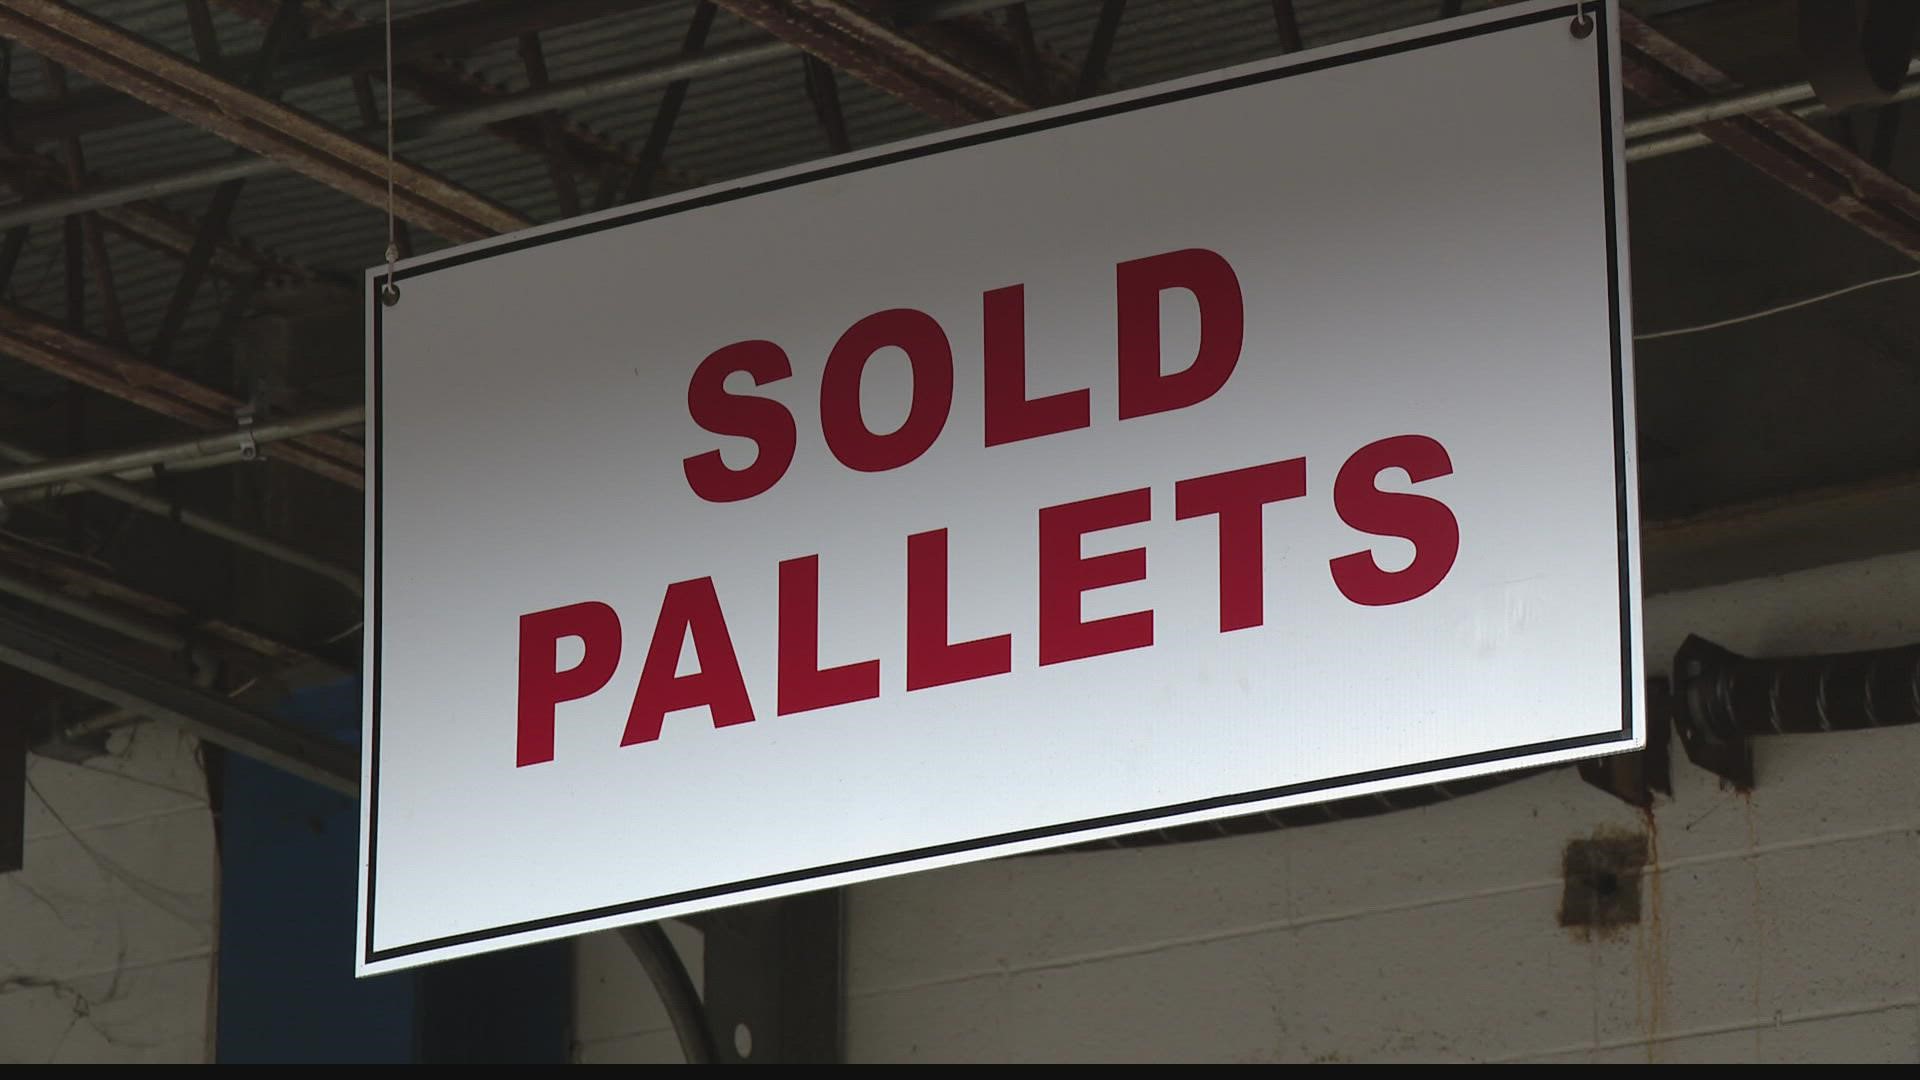 People often buy the pallets so they can flip the items in a yard sale or an online marketplace for a profit.